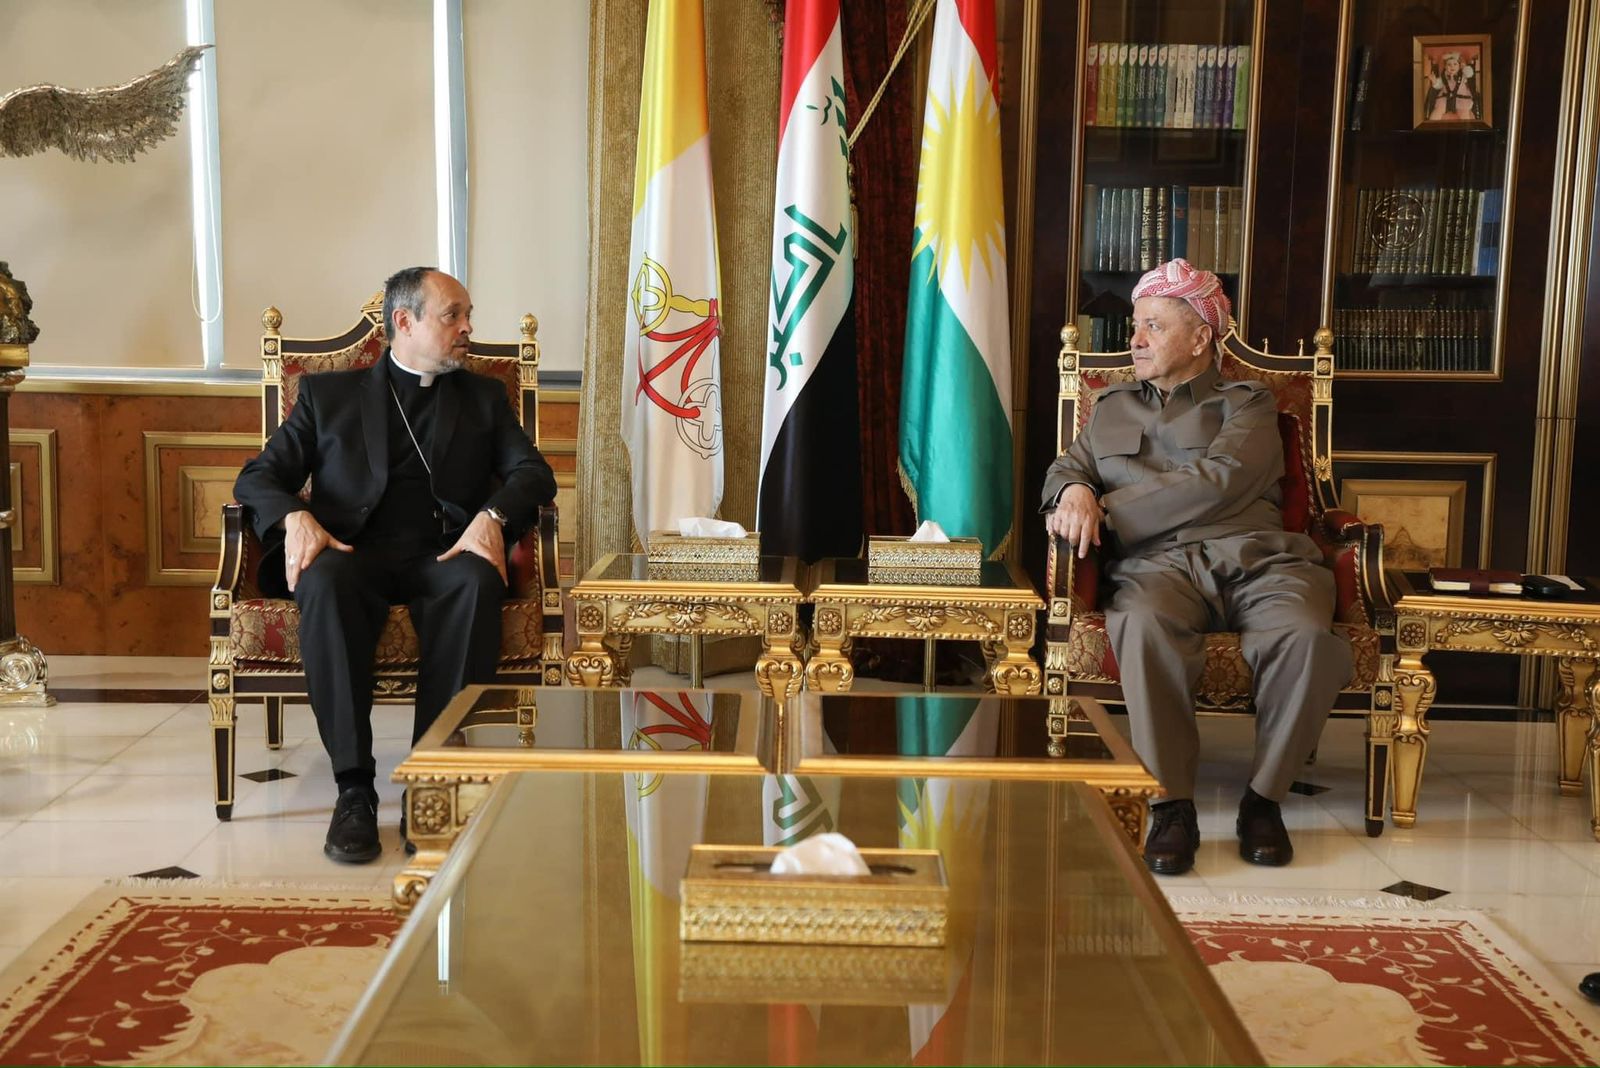 Leader Barzani meets Vatican Ambassador, praises efforts for stability and rights